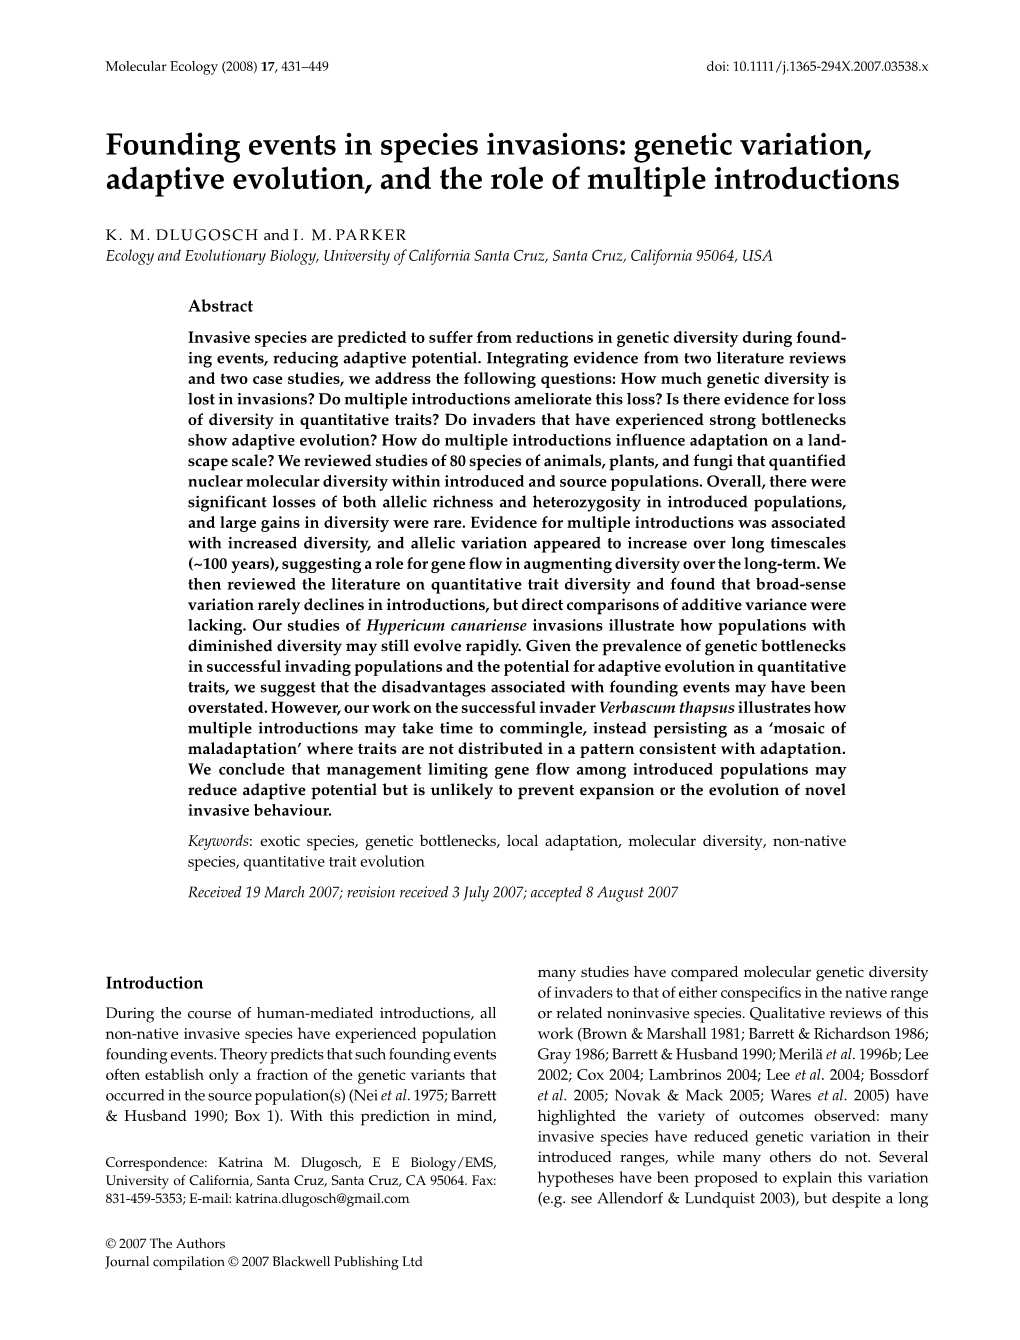 Genetic Variation, Adaptive Evolution, and the Role of Multiple Introductions